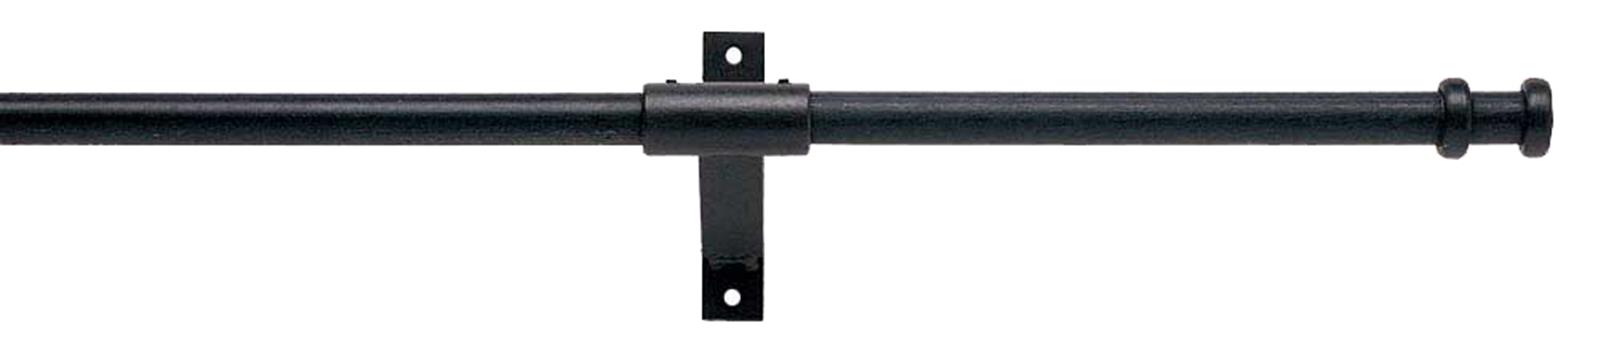 Artisan Wrought Iron Curtain Pole 16mm Stopper